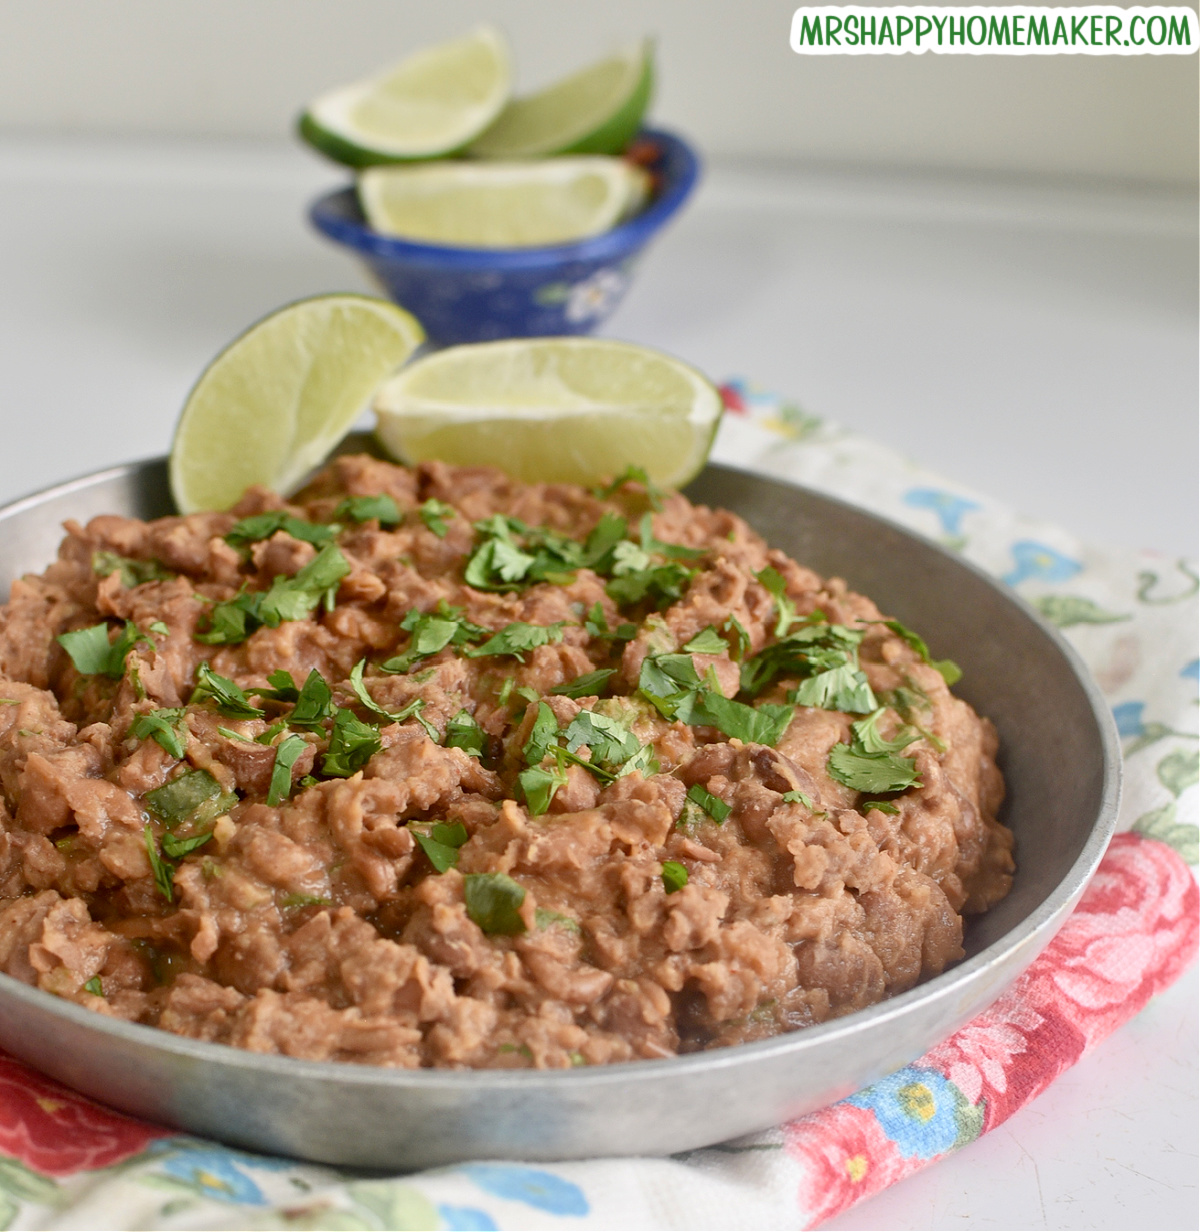 Easy homemade refried beans in a round silver bowl beside a small blue bowl of lime slices